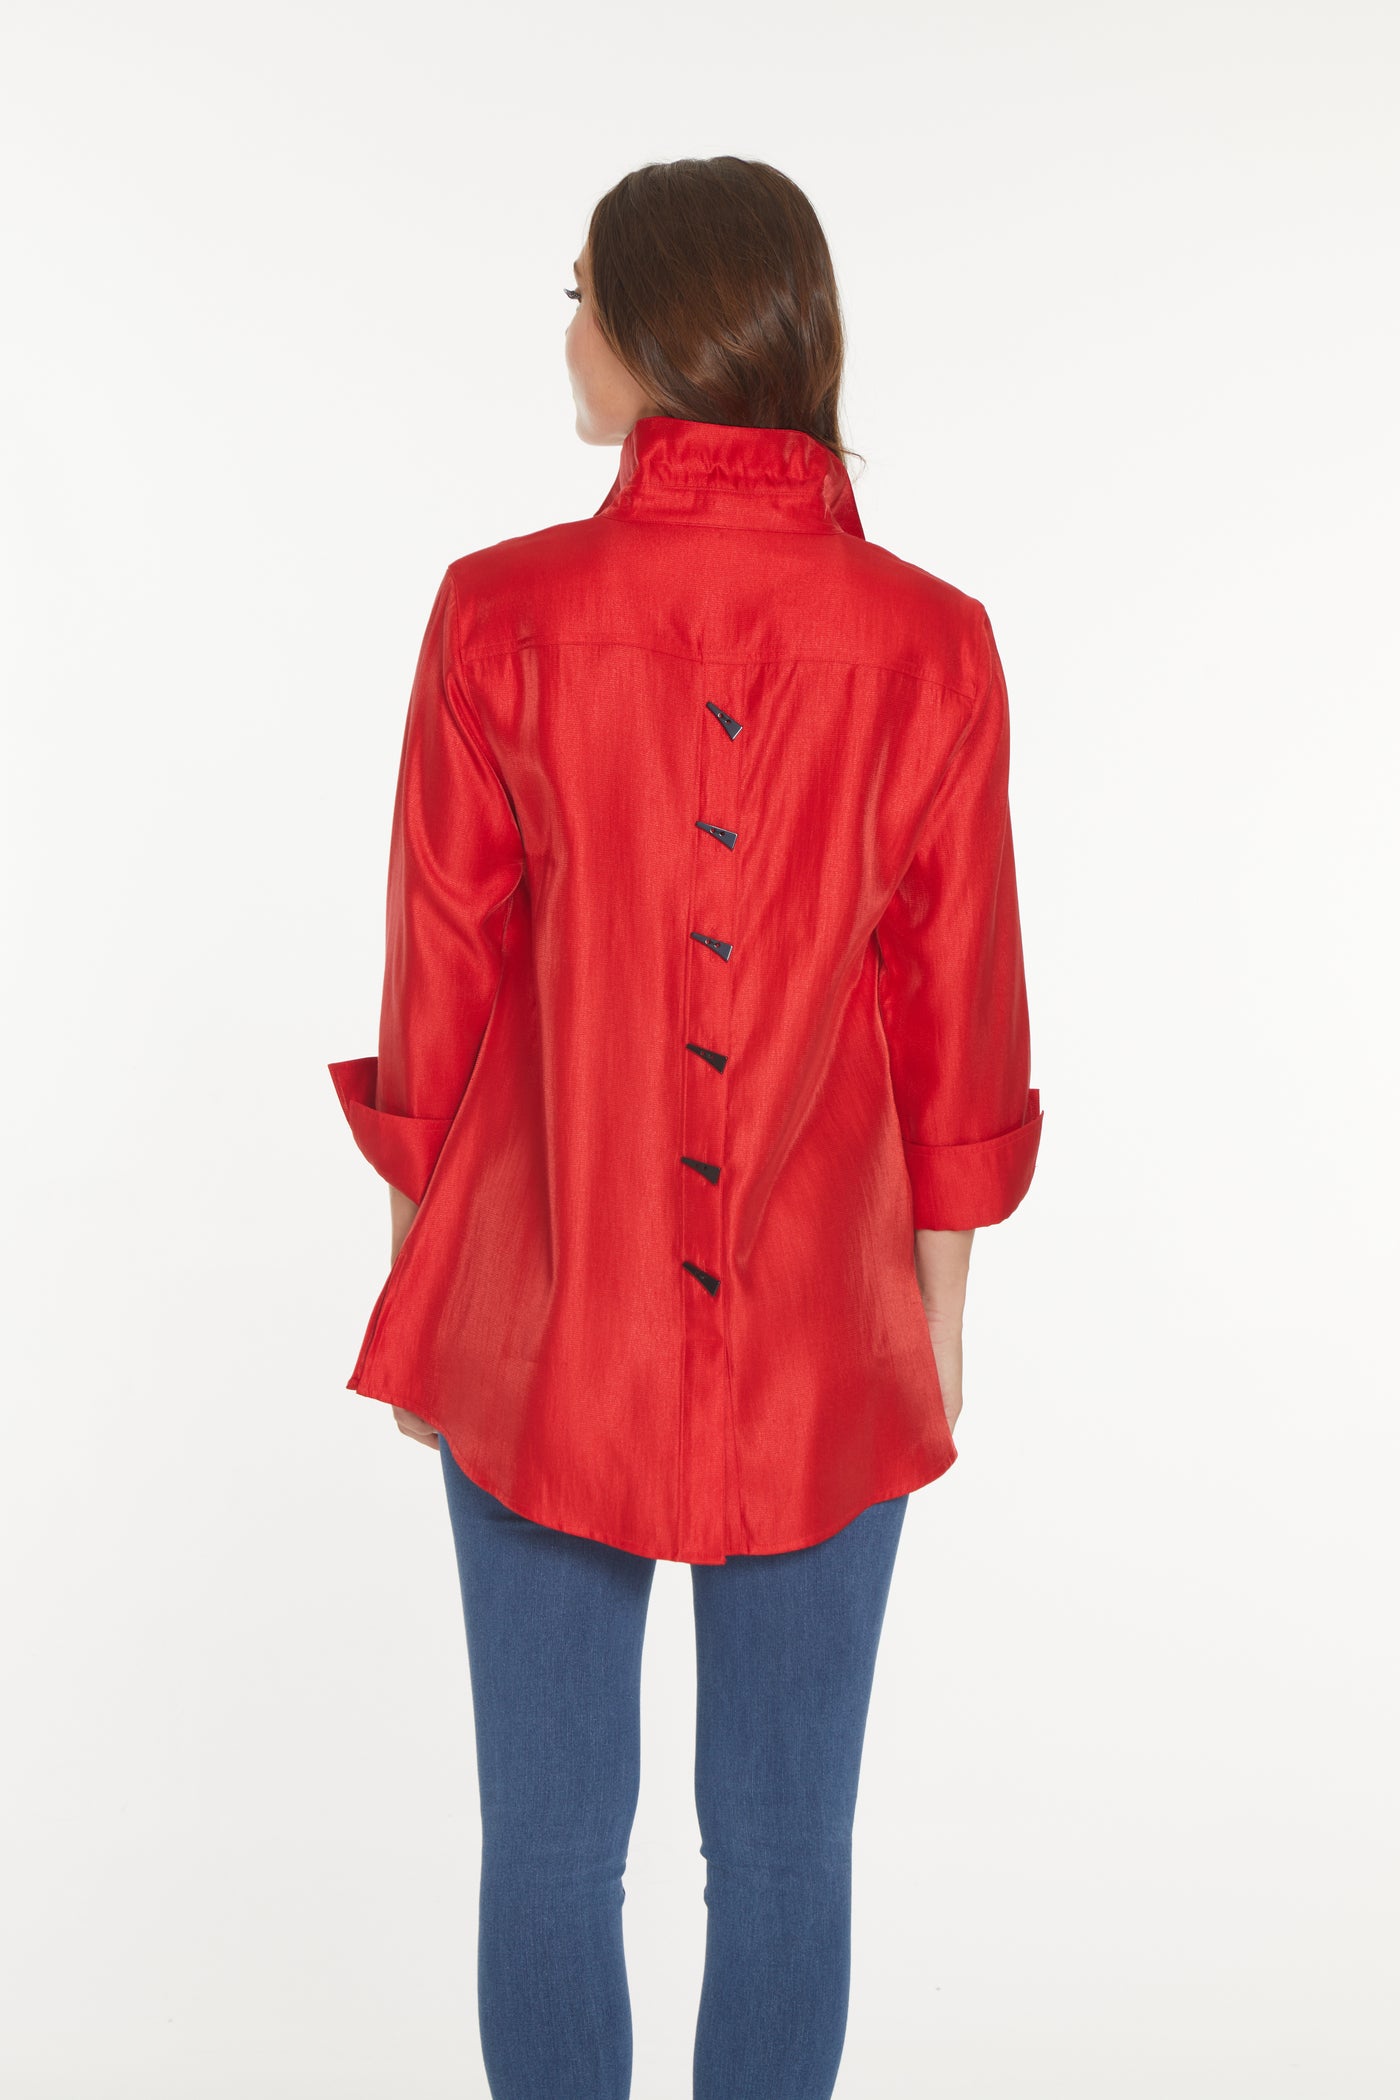 Button Front Shirt - Ruby Red